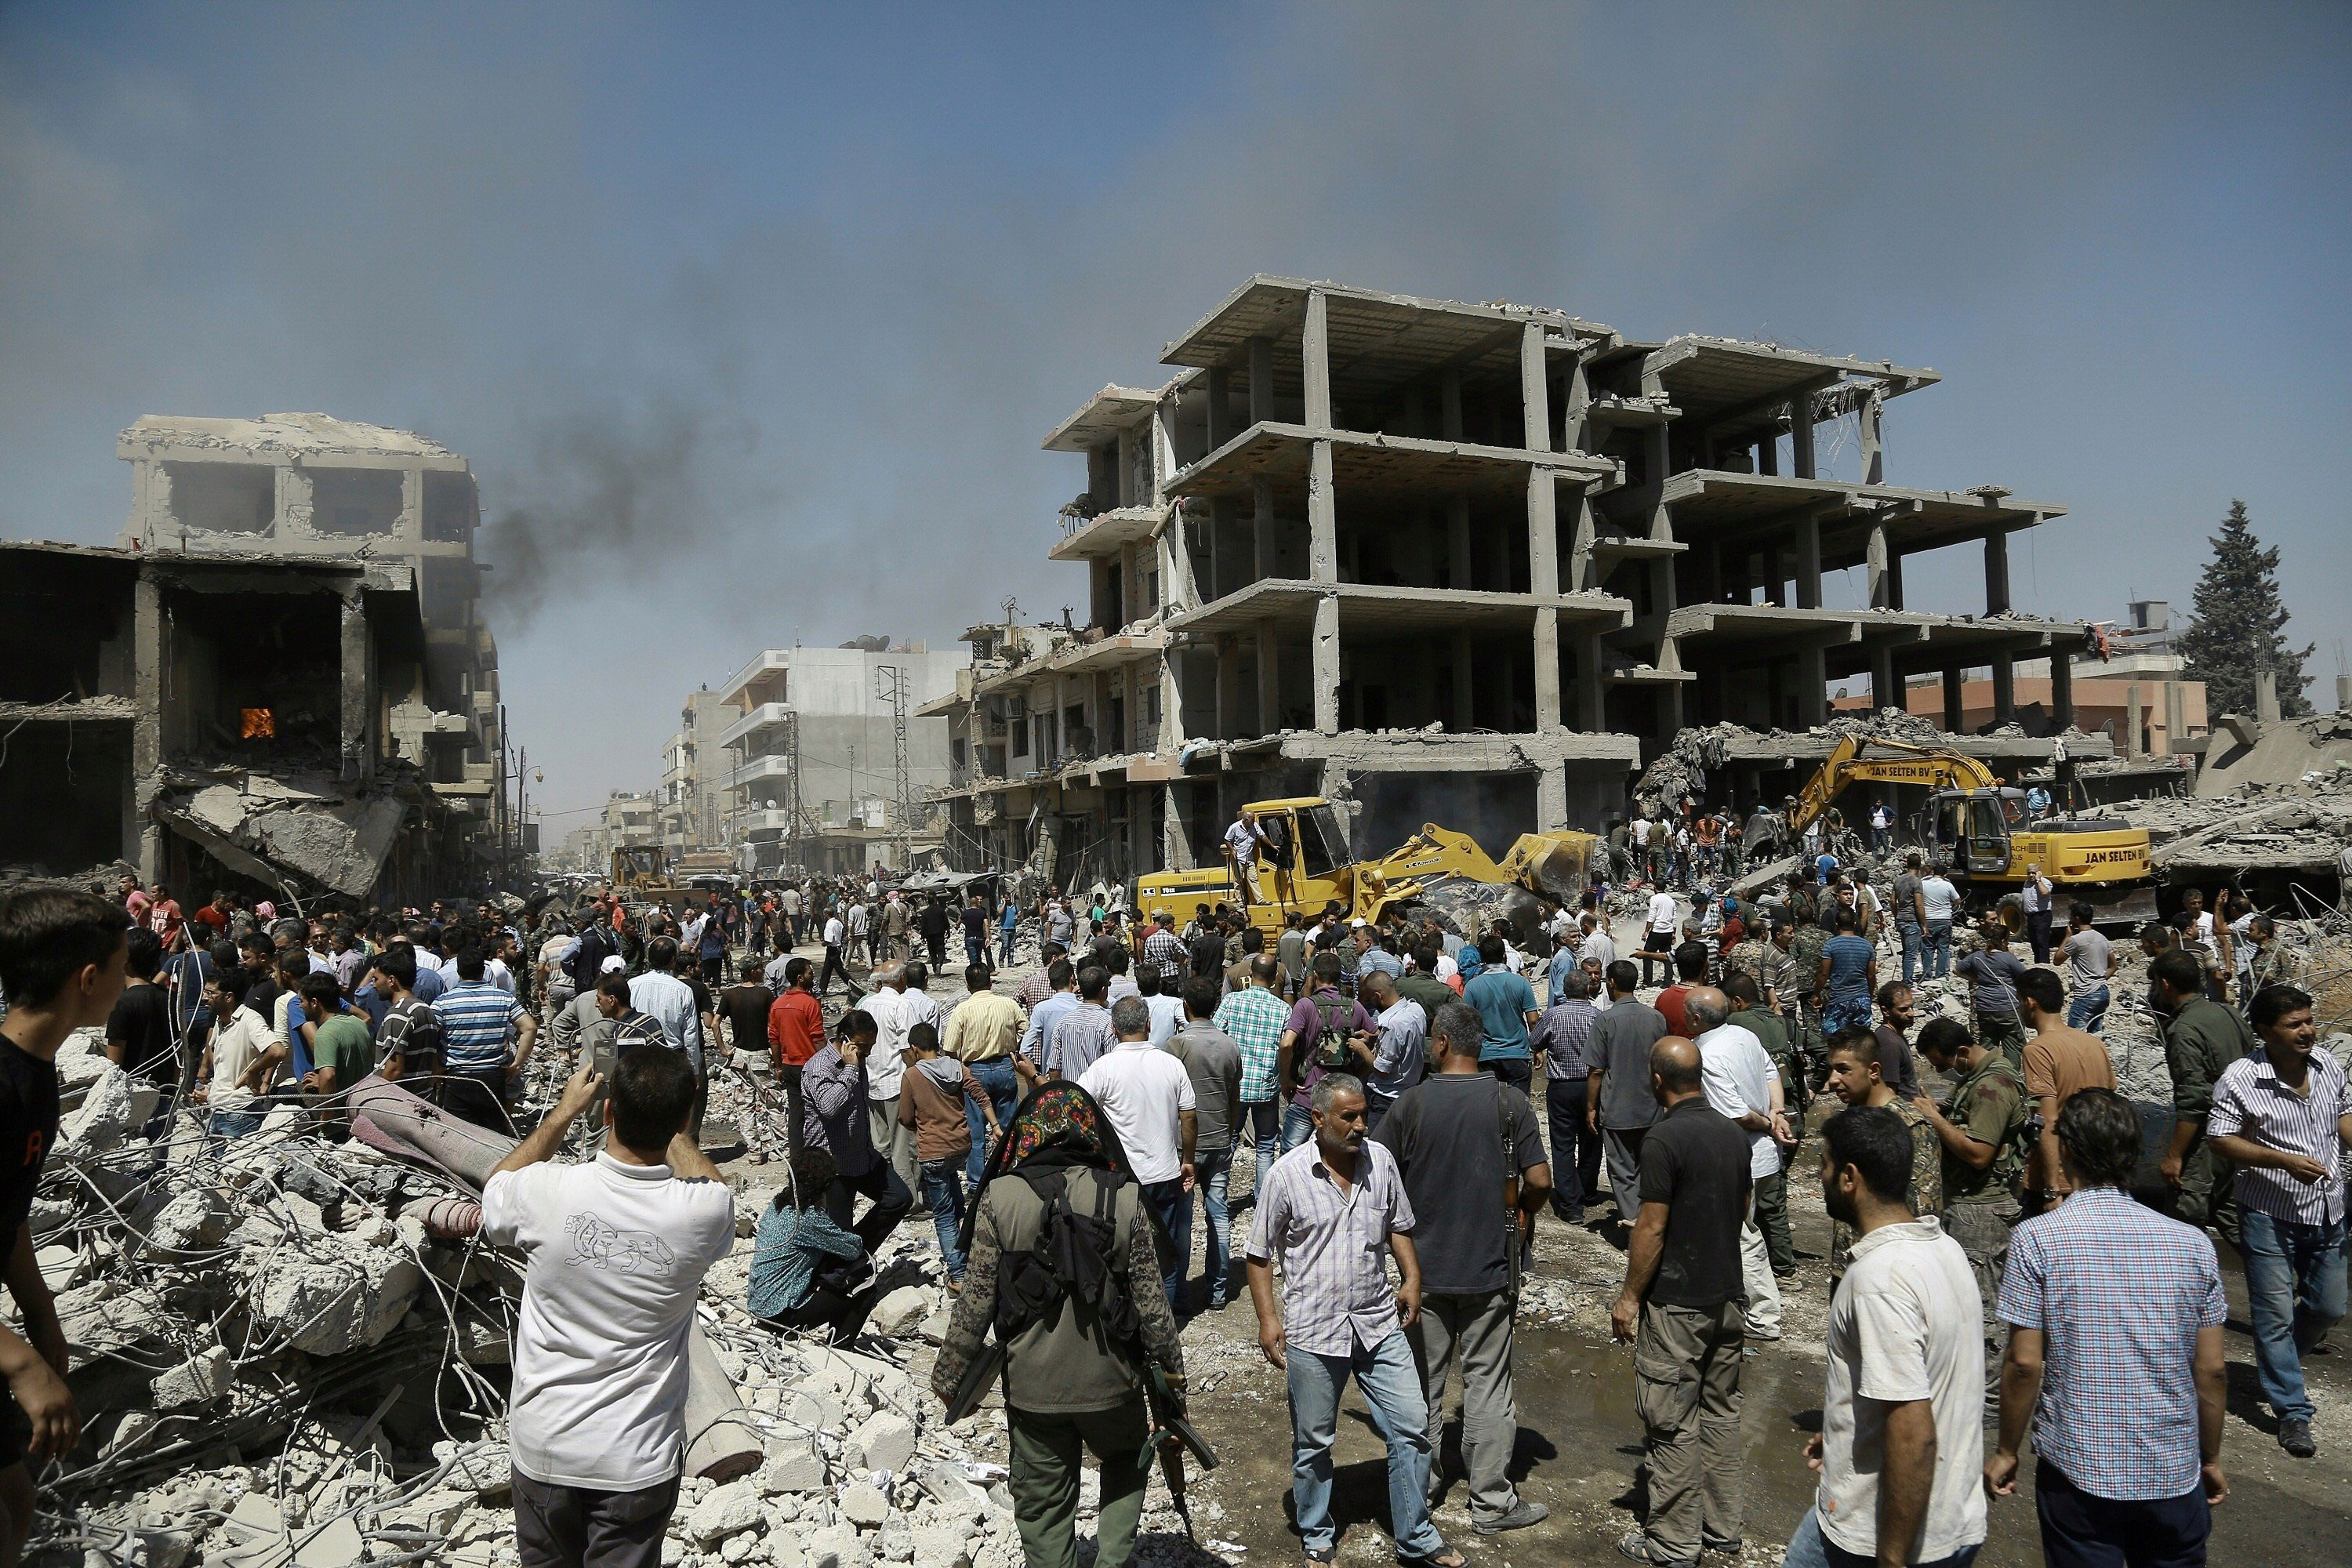 Bombings kill at least 31 in northeast Syria city